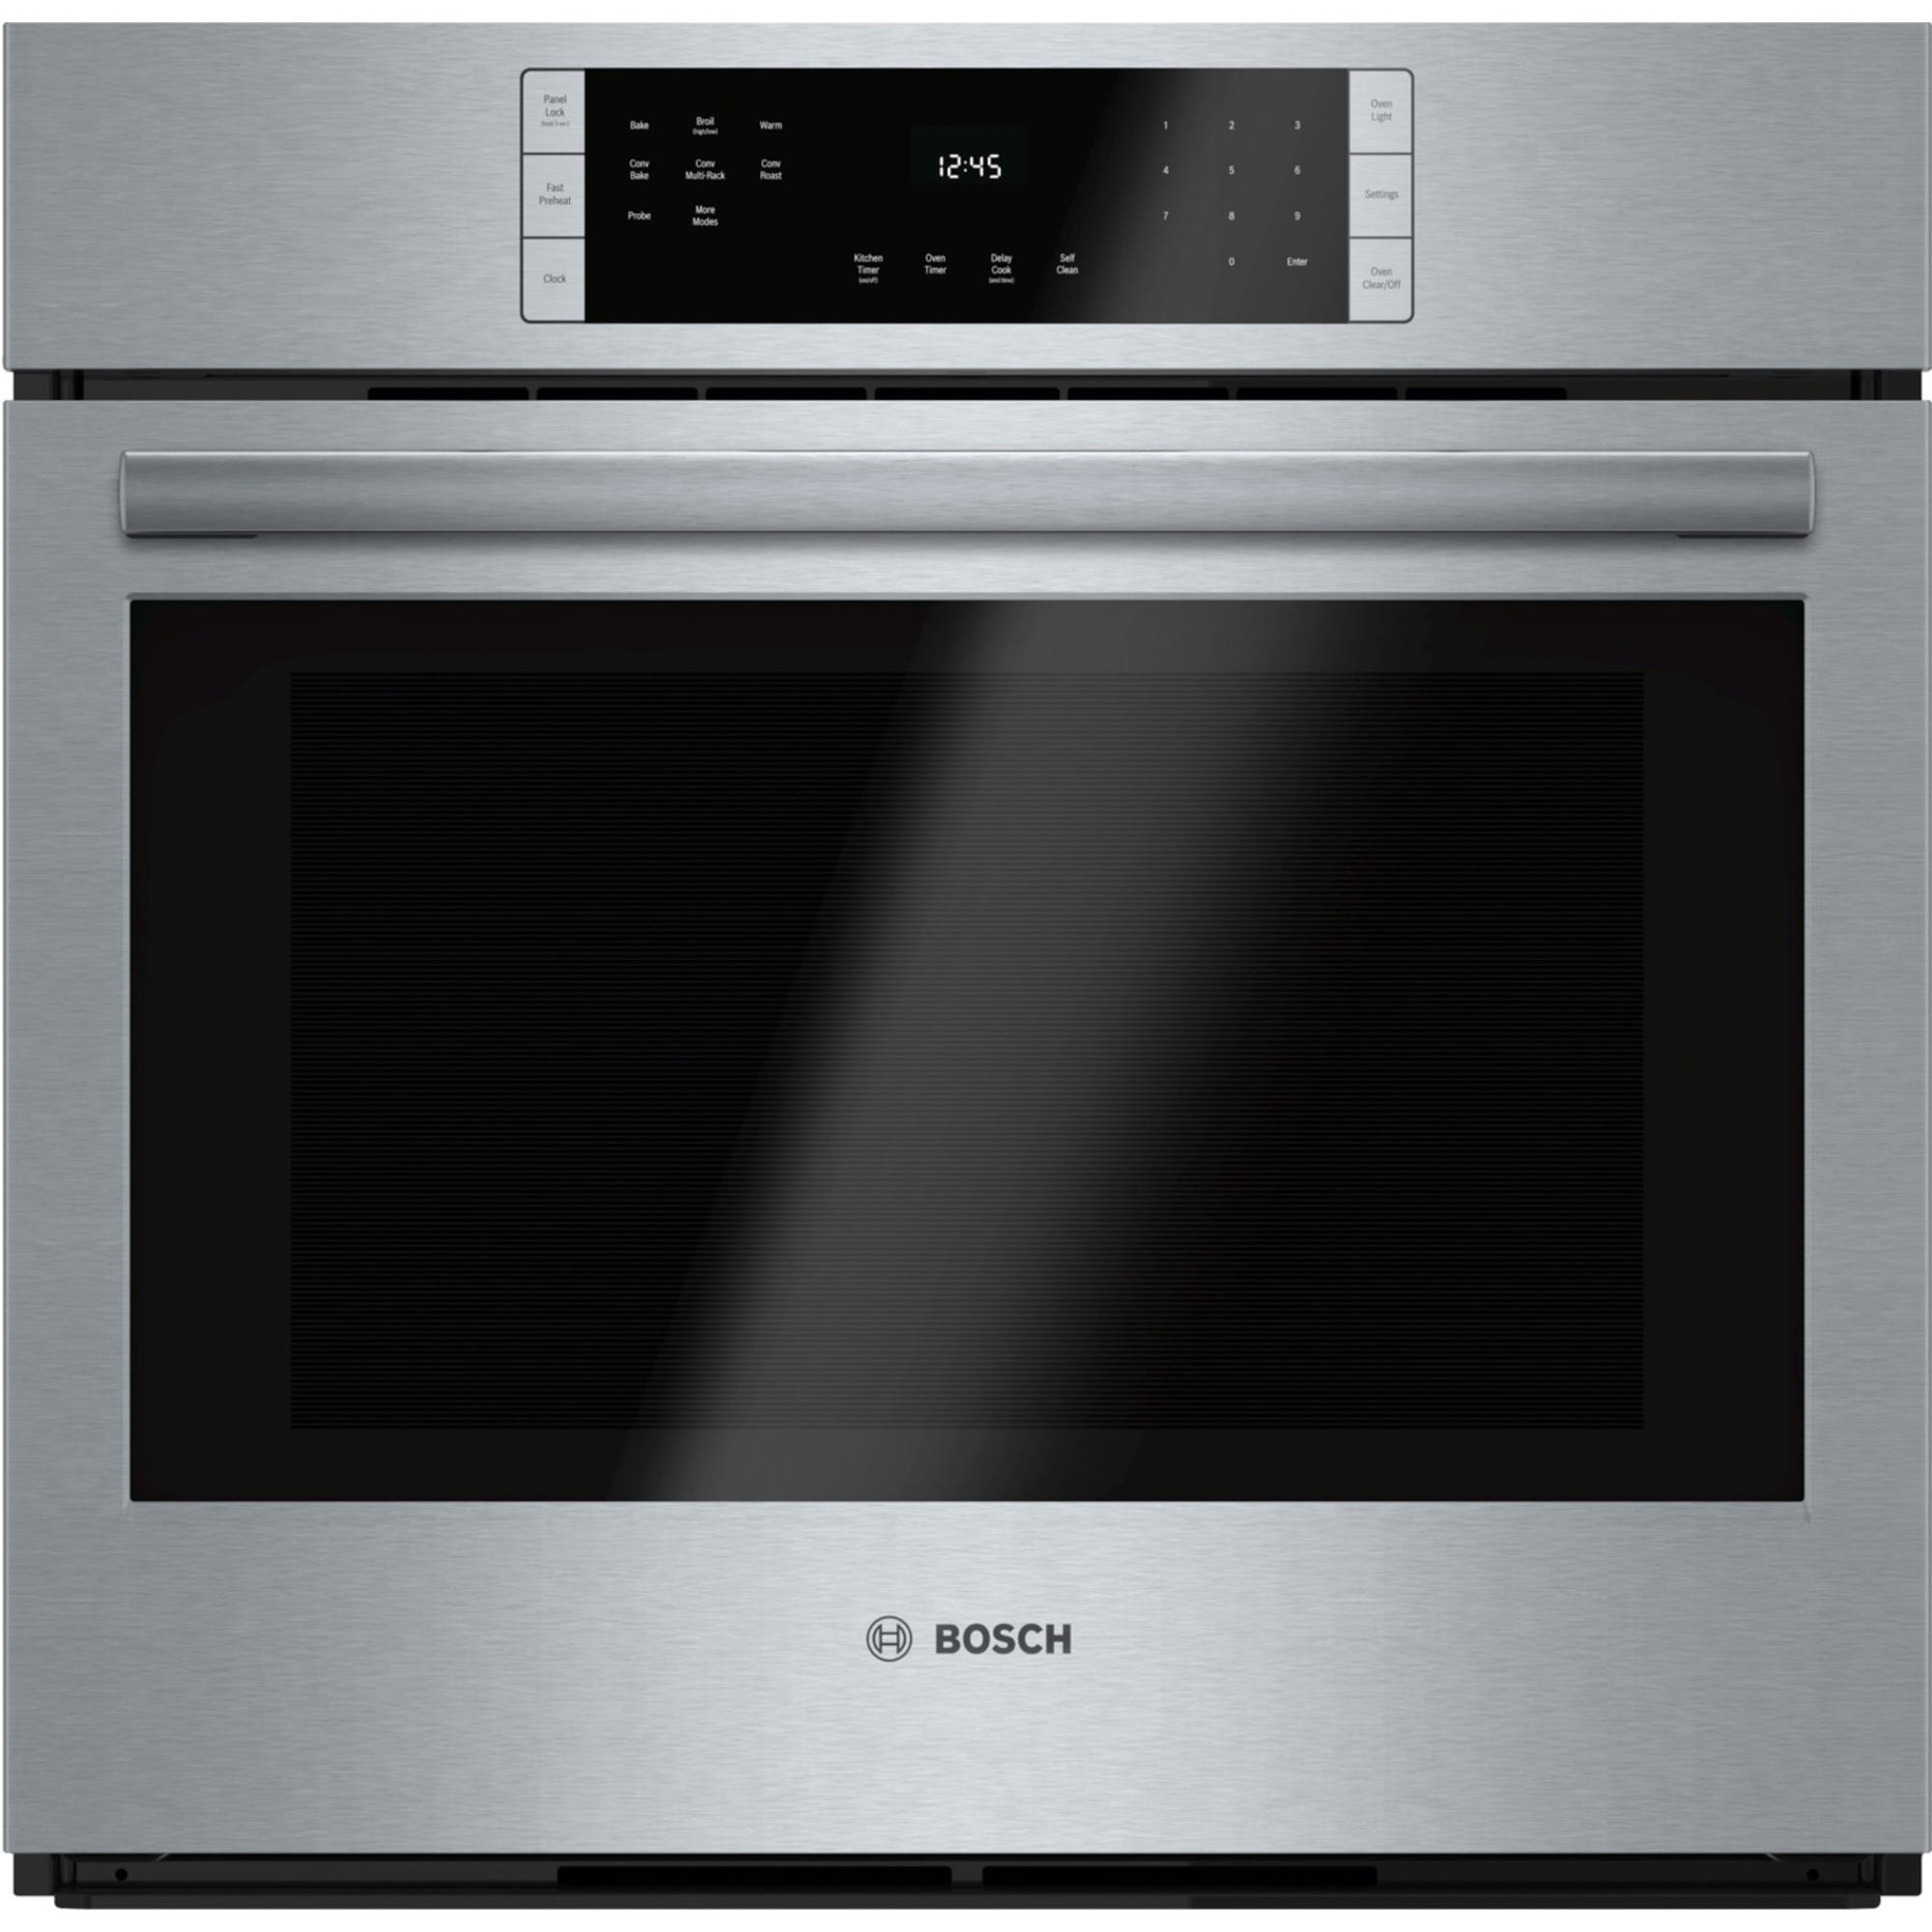 0825225906513 - HBL8451UC 30 800 SERIES SINGLE WALL OVEN W/ CONVECTION - STAINLESS STEEL